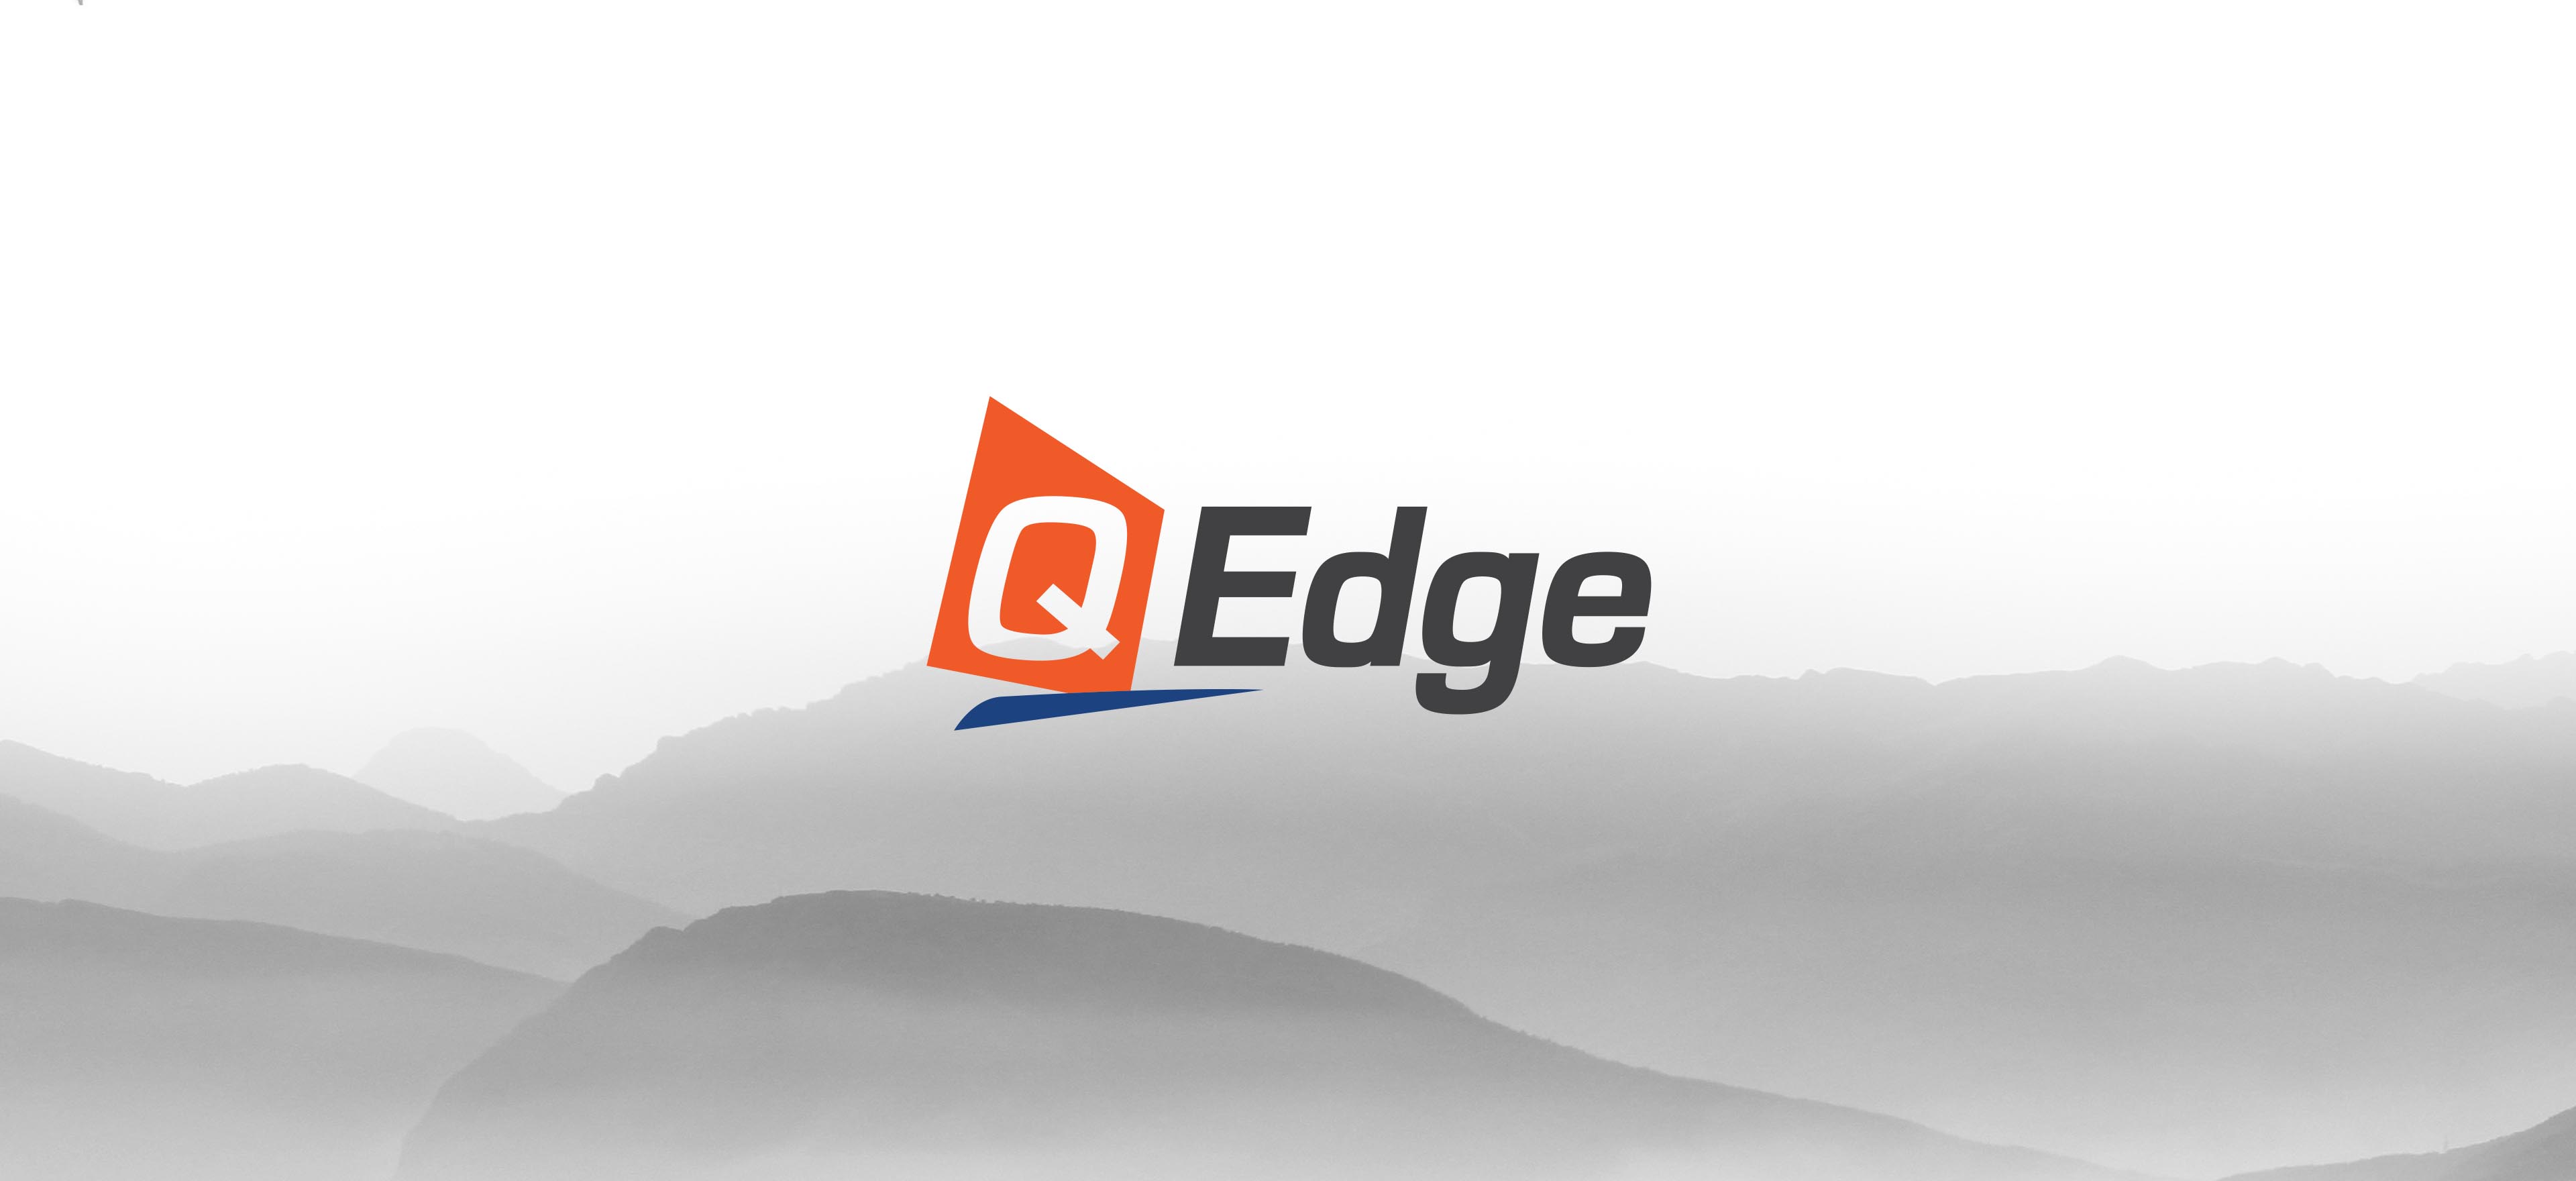 QEdge banner: How to Choose Sitecore Partner